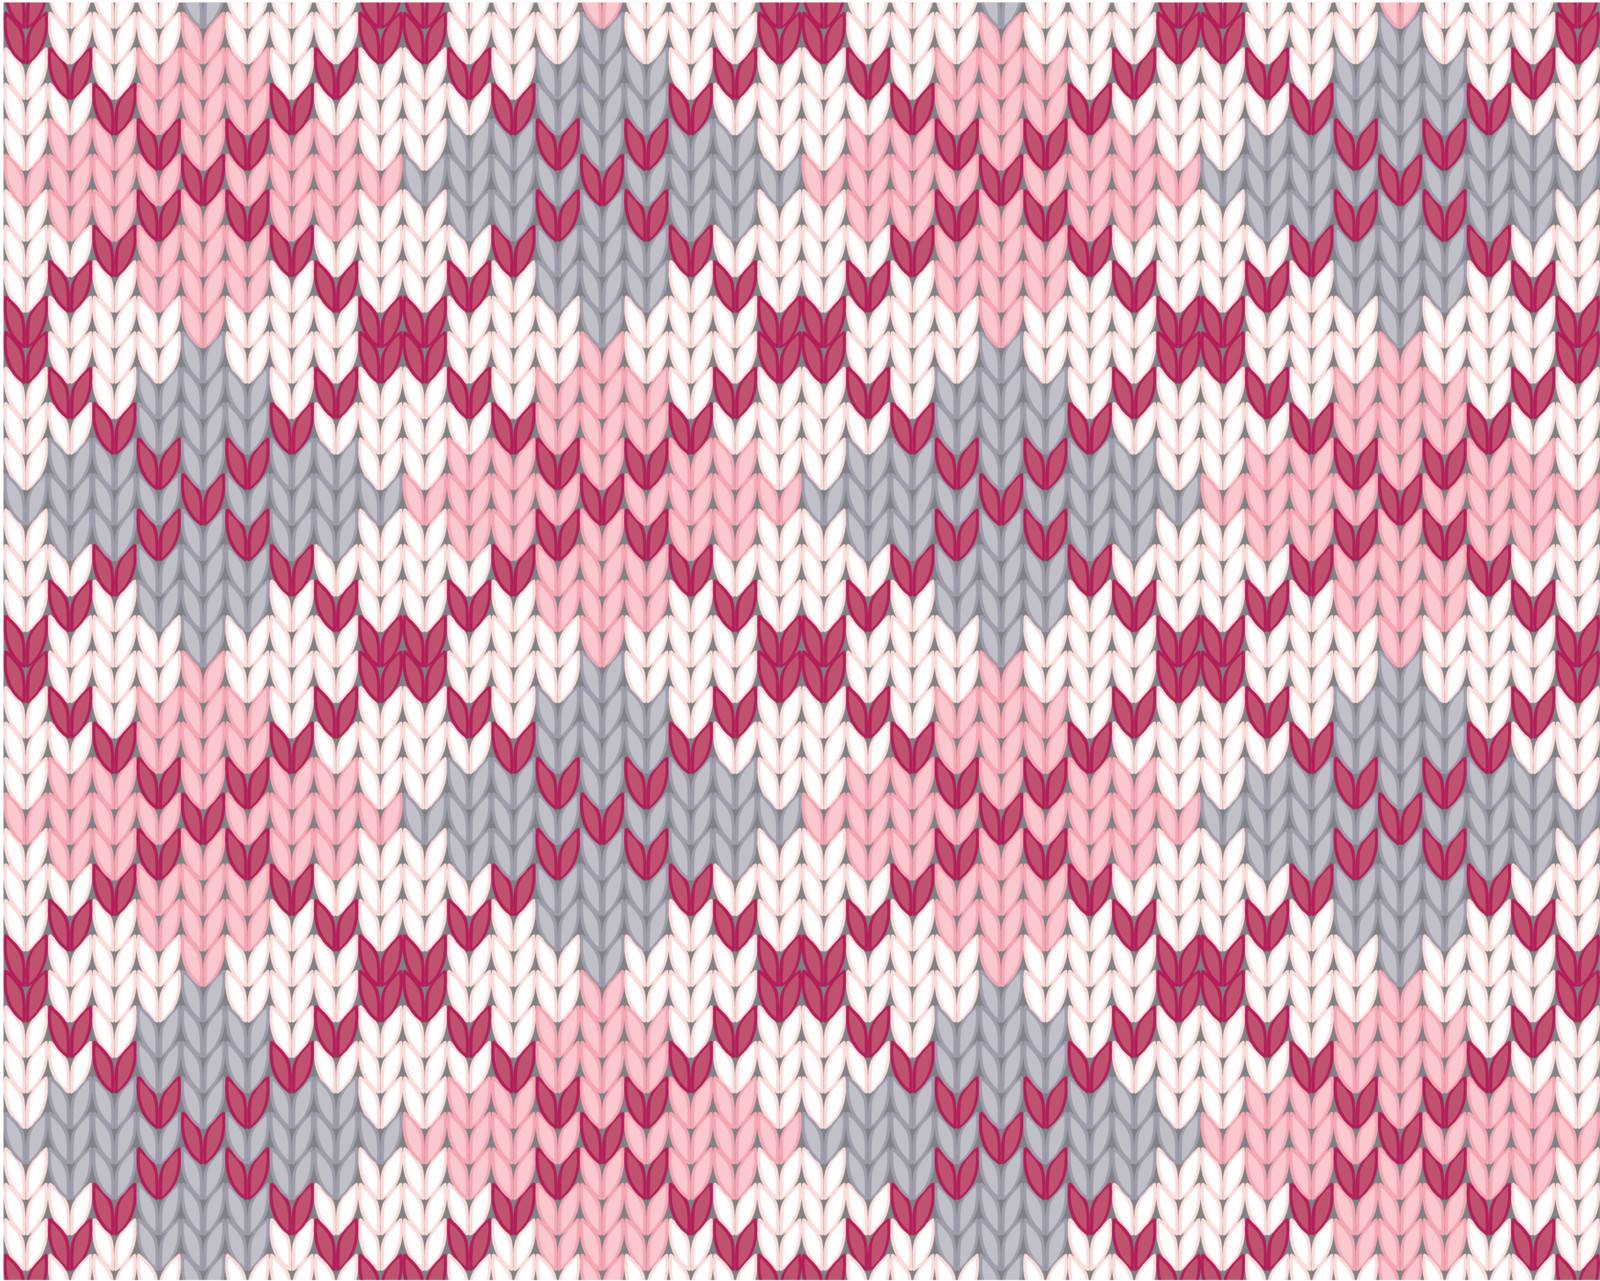 Seamless knitted pattern for clothing. EPS 8 vector illustration.